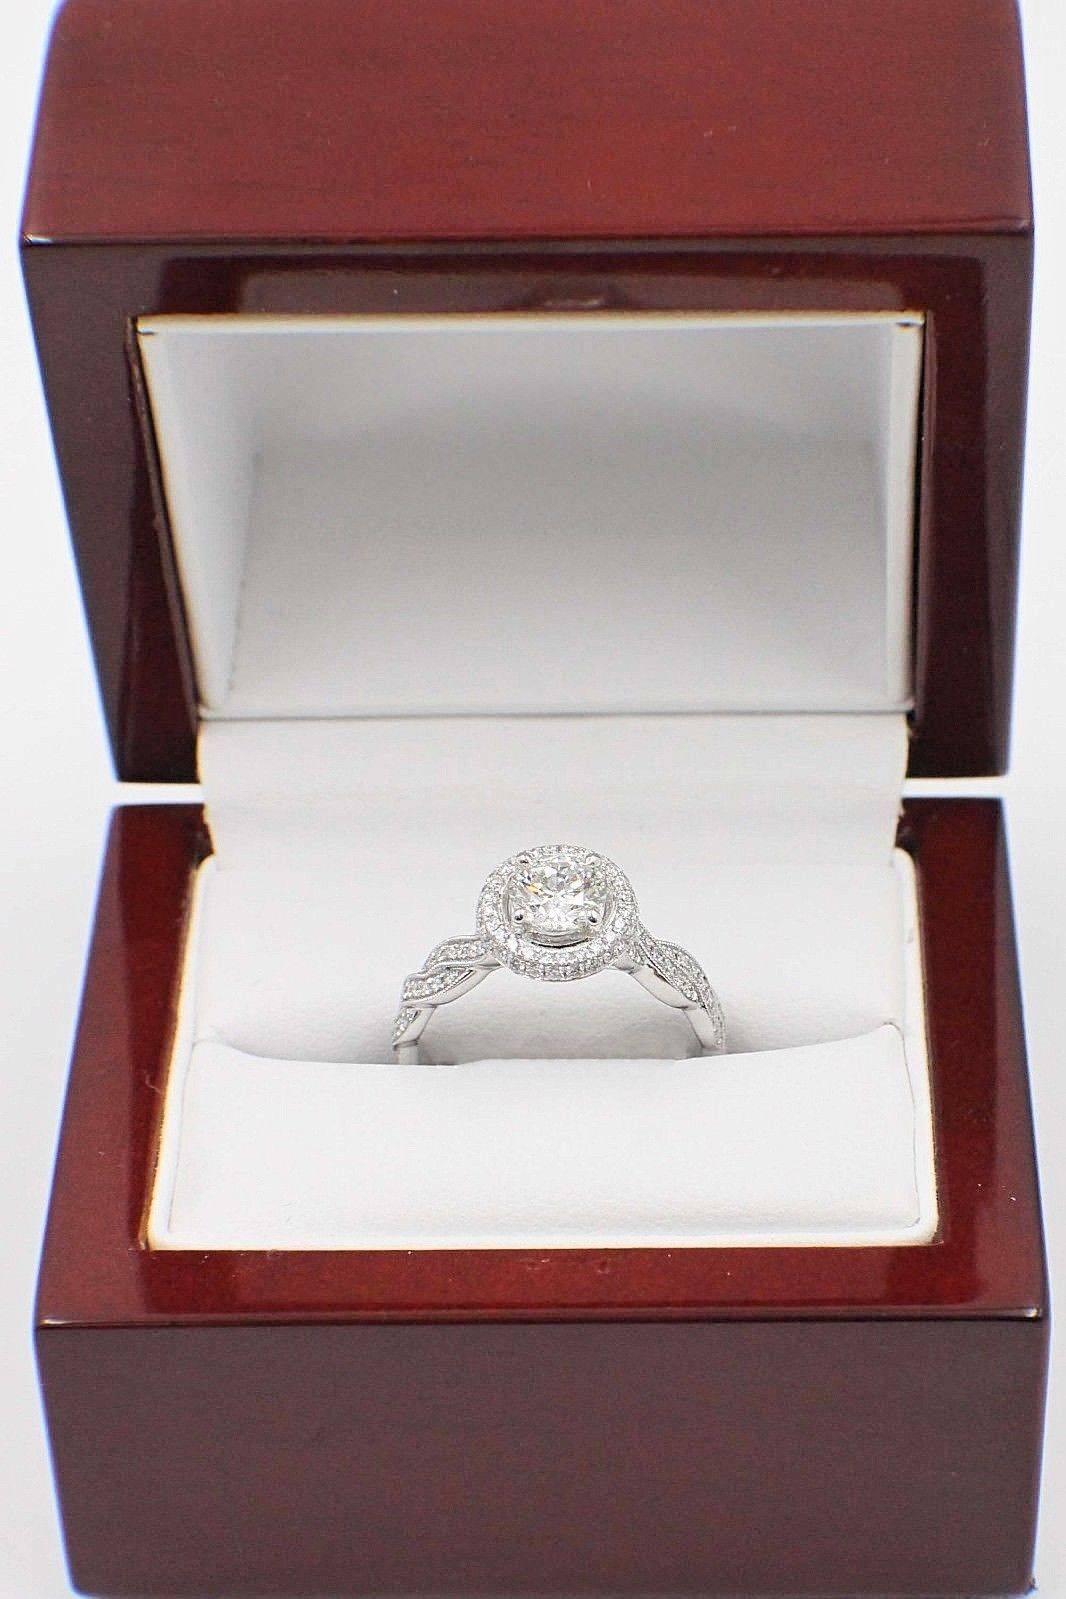 Simon G Diamond Engagement Ring Twisted Design Halo 1.15 Carat GIA Certificate For Sale 1